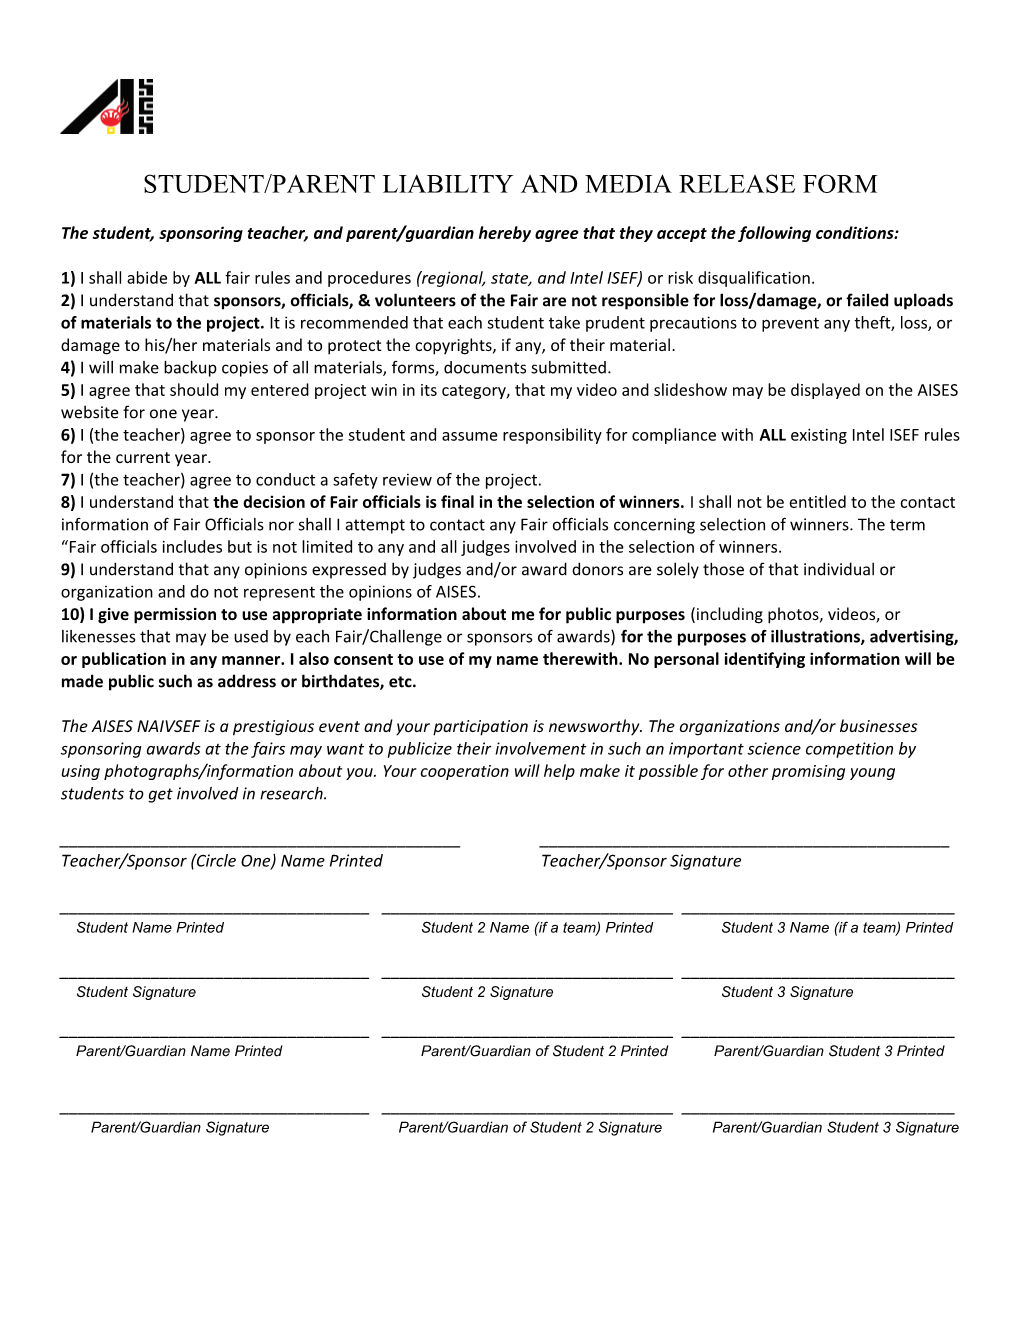 Student/Parent Liability and Media Release Form